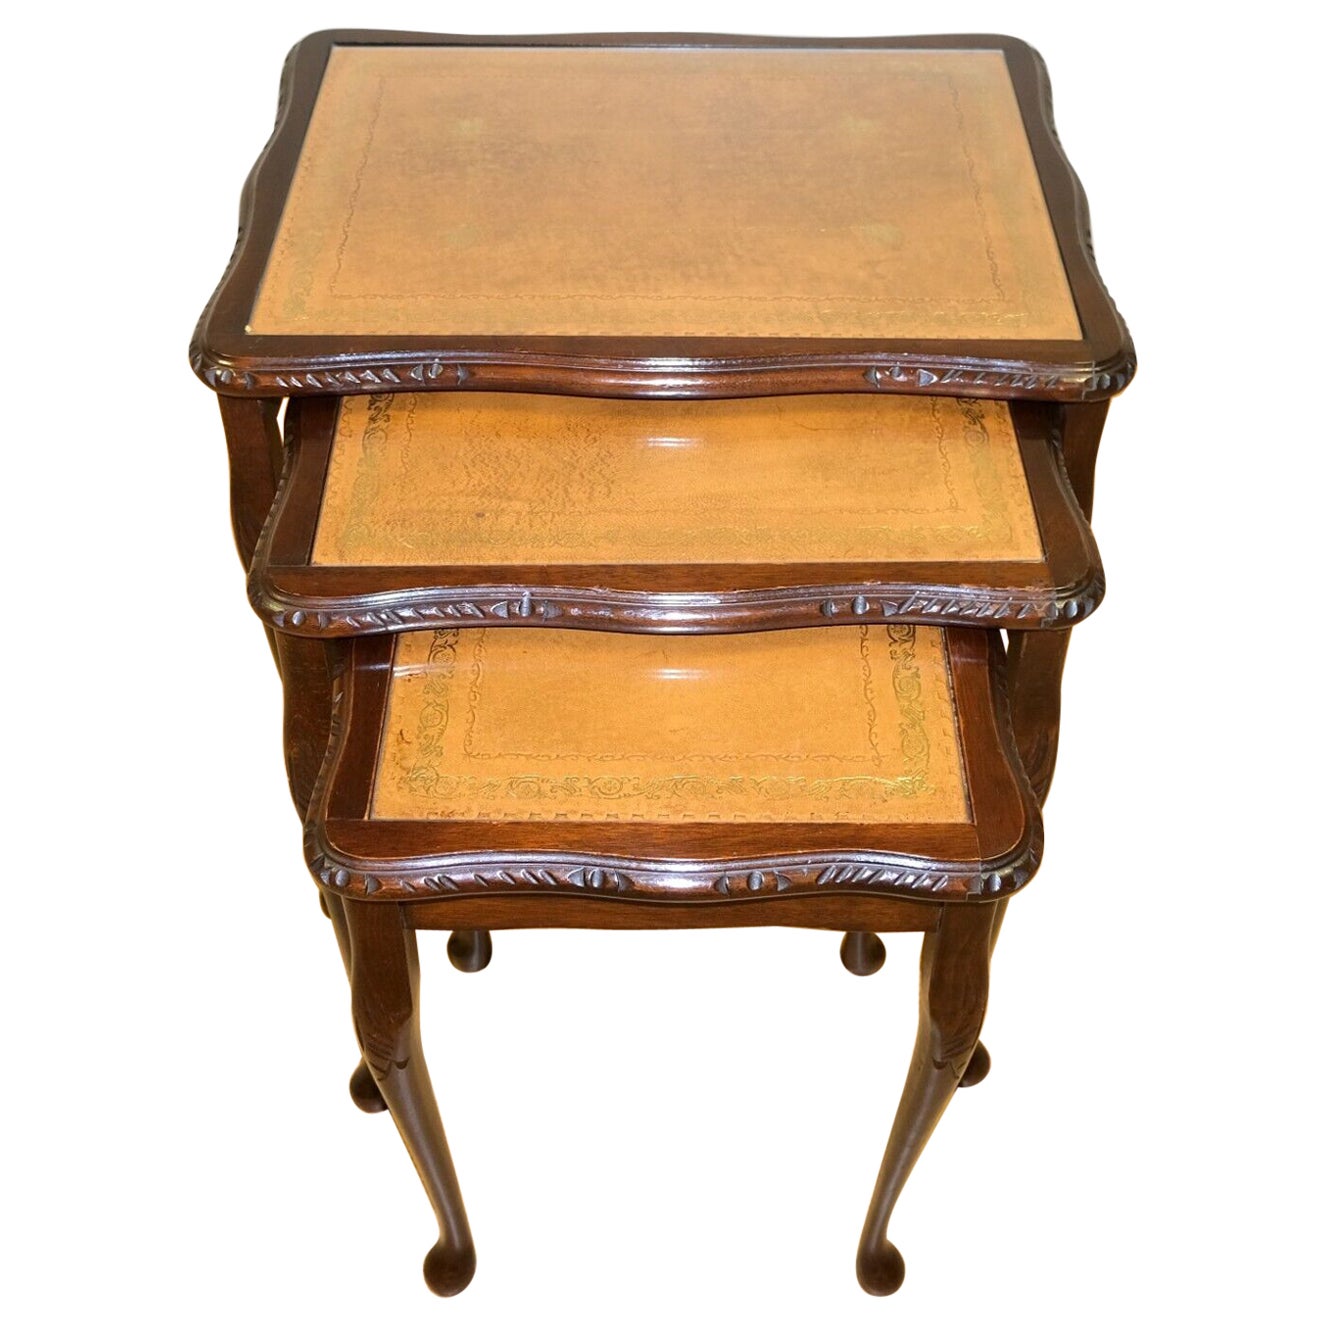 Lovely Bevan Funnell Hardwood Nest of Tables with Brown Leather & Glass Tops